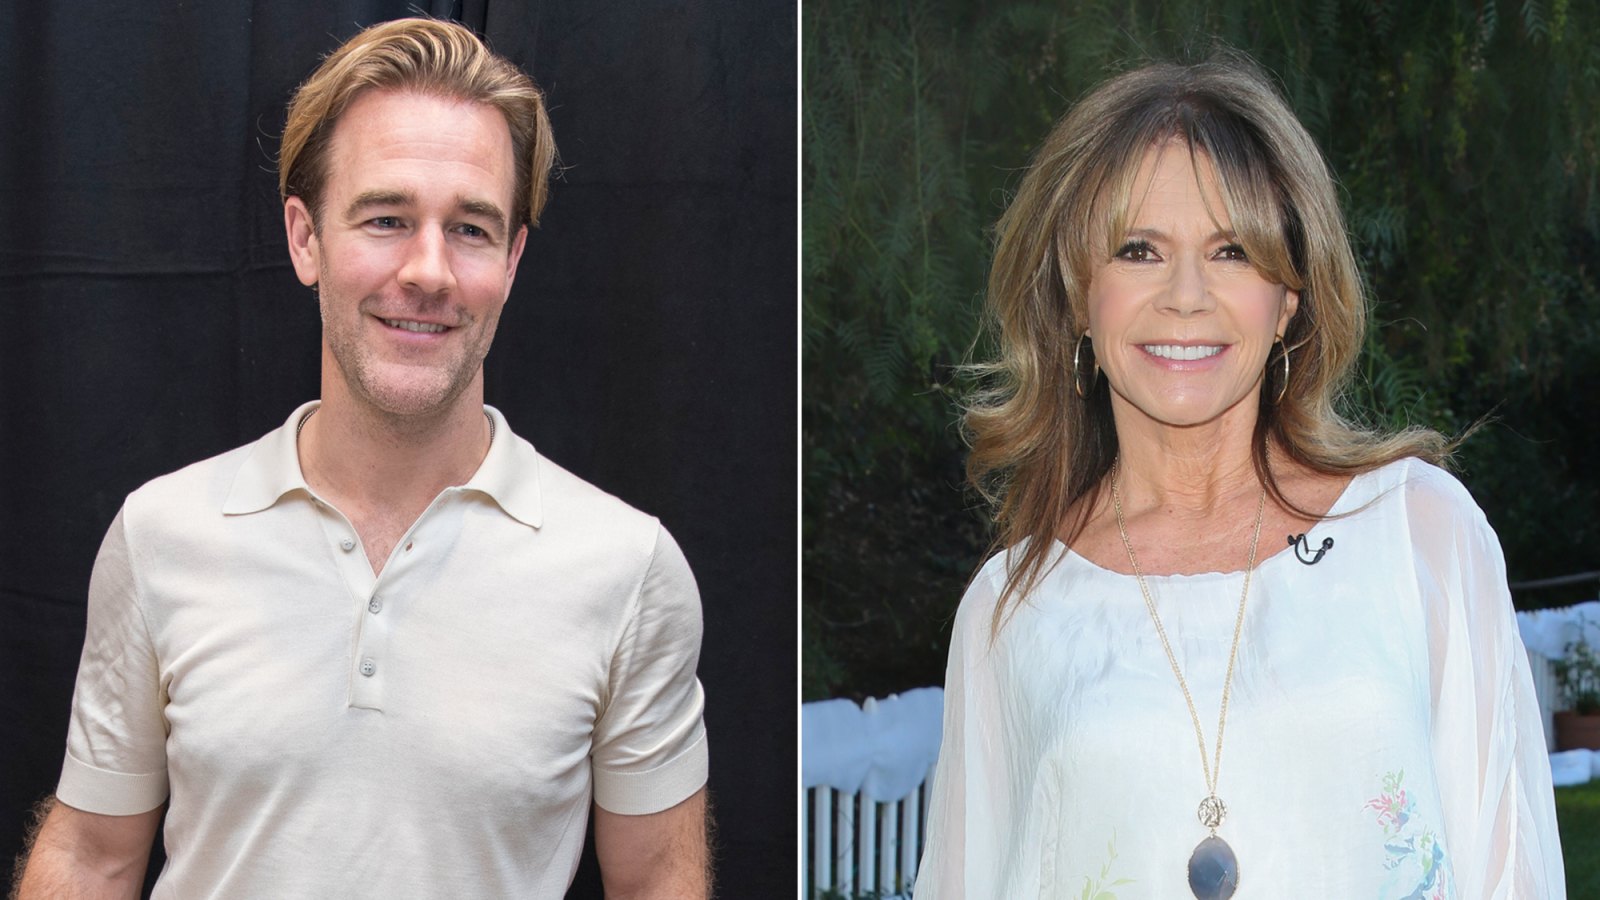 Reunion! James Van Der Beek Celebrates Christmas Vacation With His 'Dawson's Creek' Mom Mary-Margaret Humes